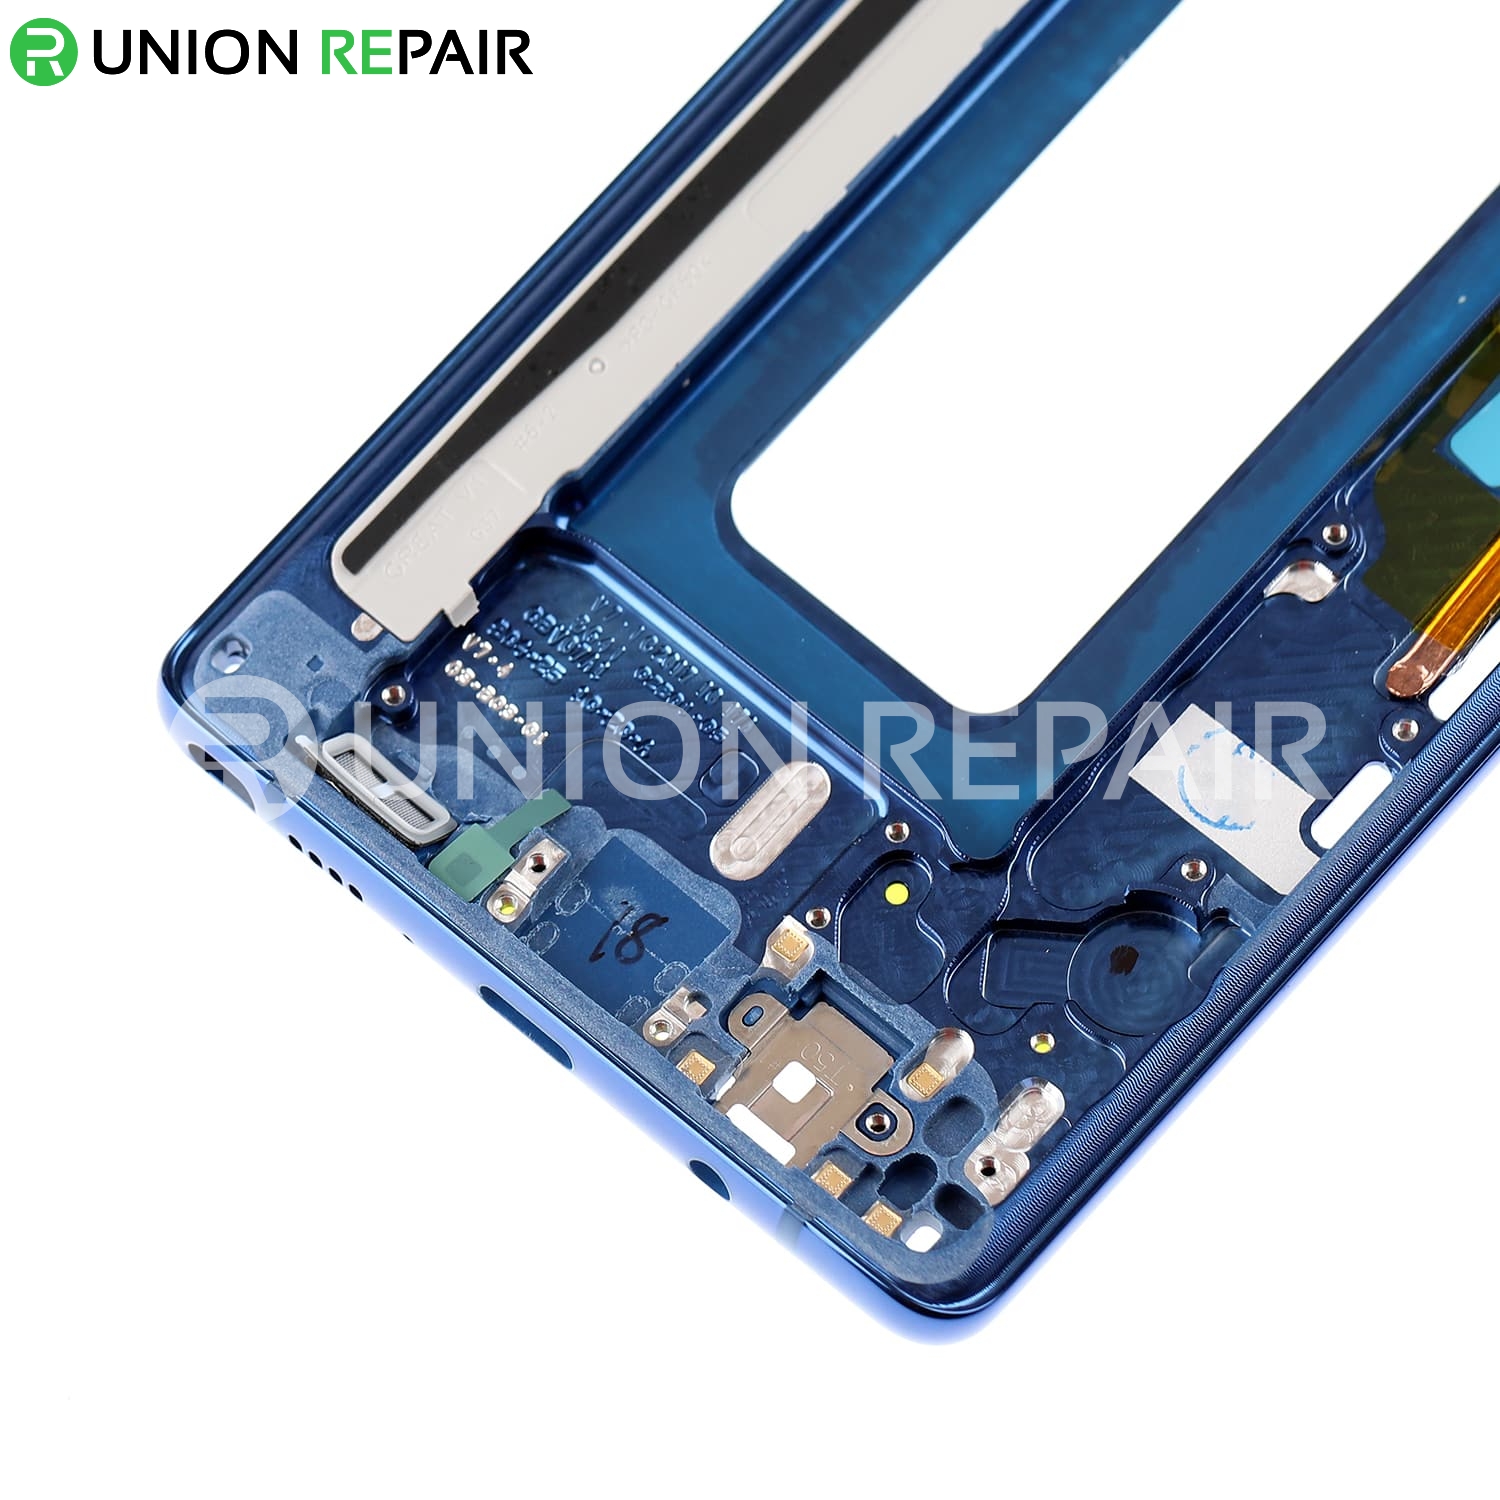 Replacement for Samsung Galaxy Note 8 SM-N950 Rear Housing Frame - Blue